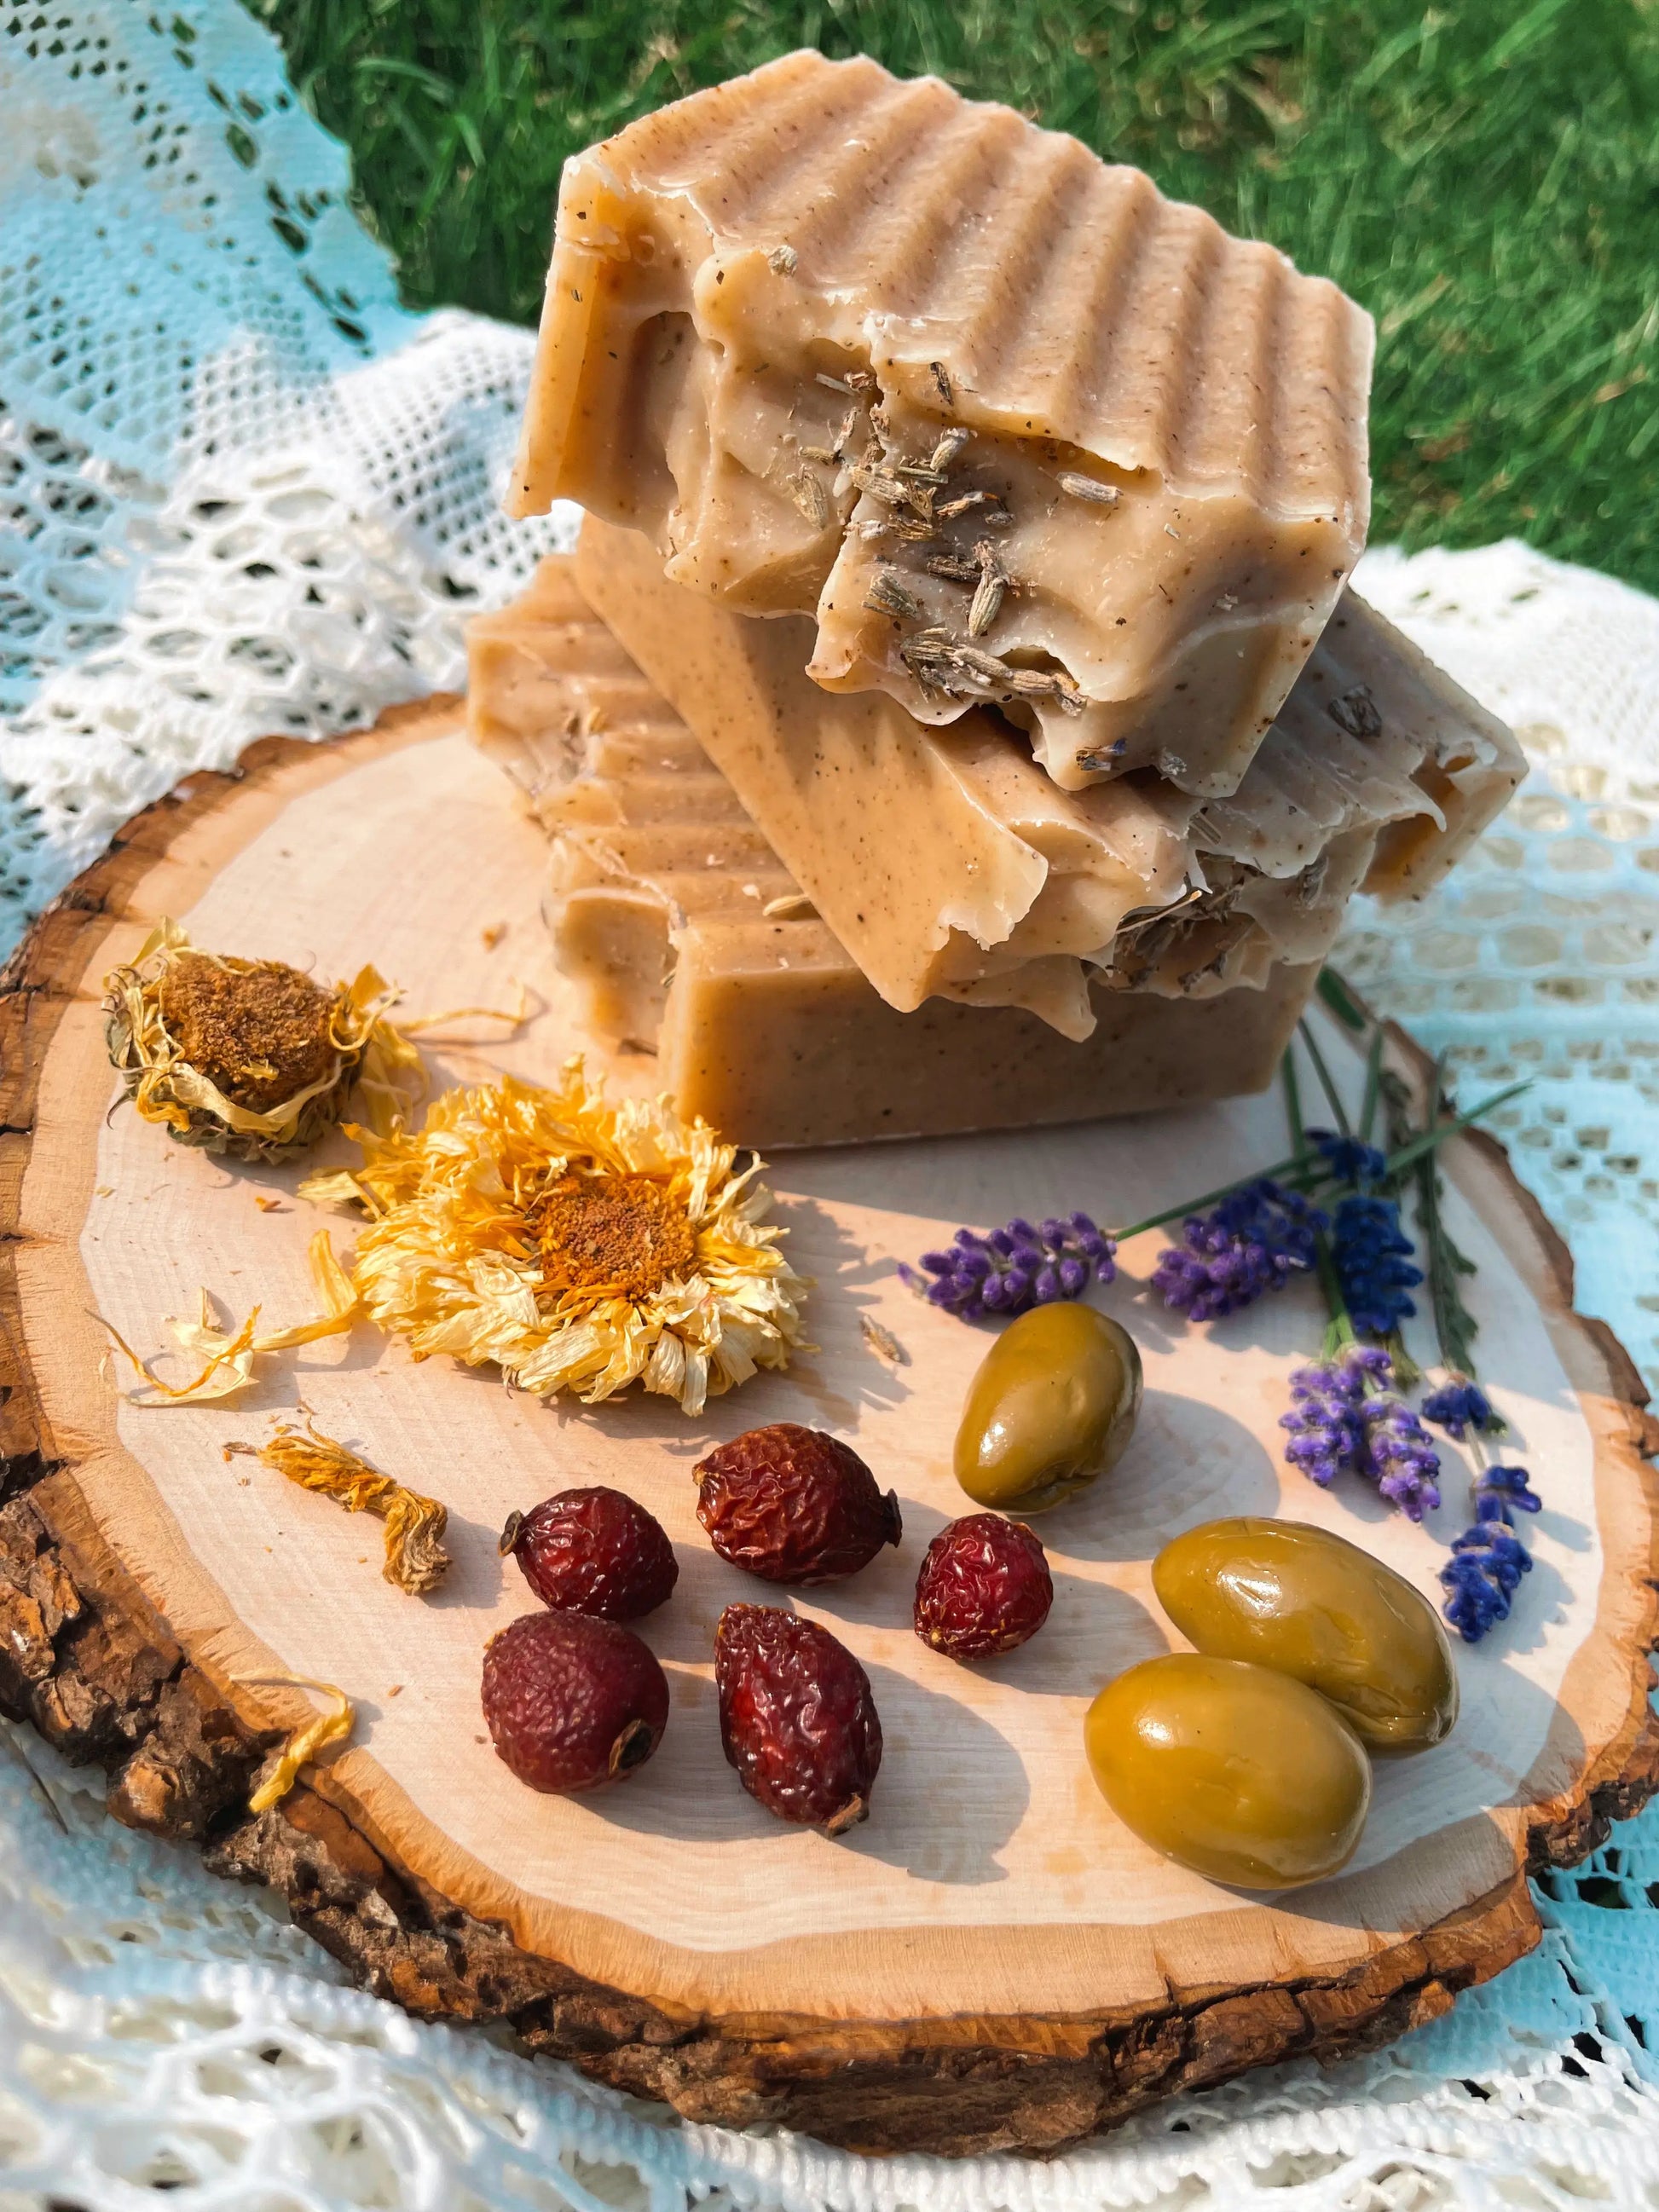 The Goat - herbal infused goat milk soap Natalies Naturals Apothecary